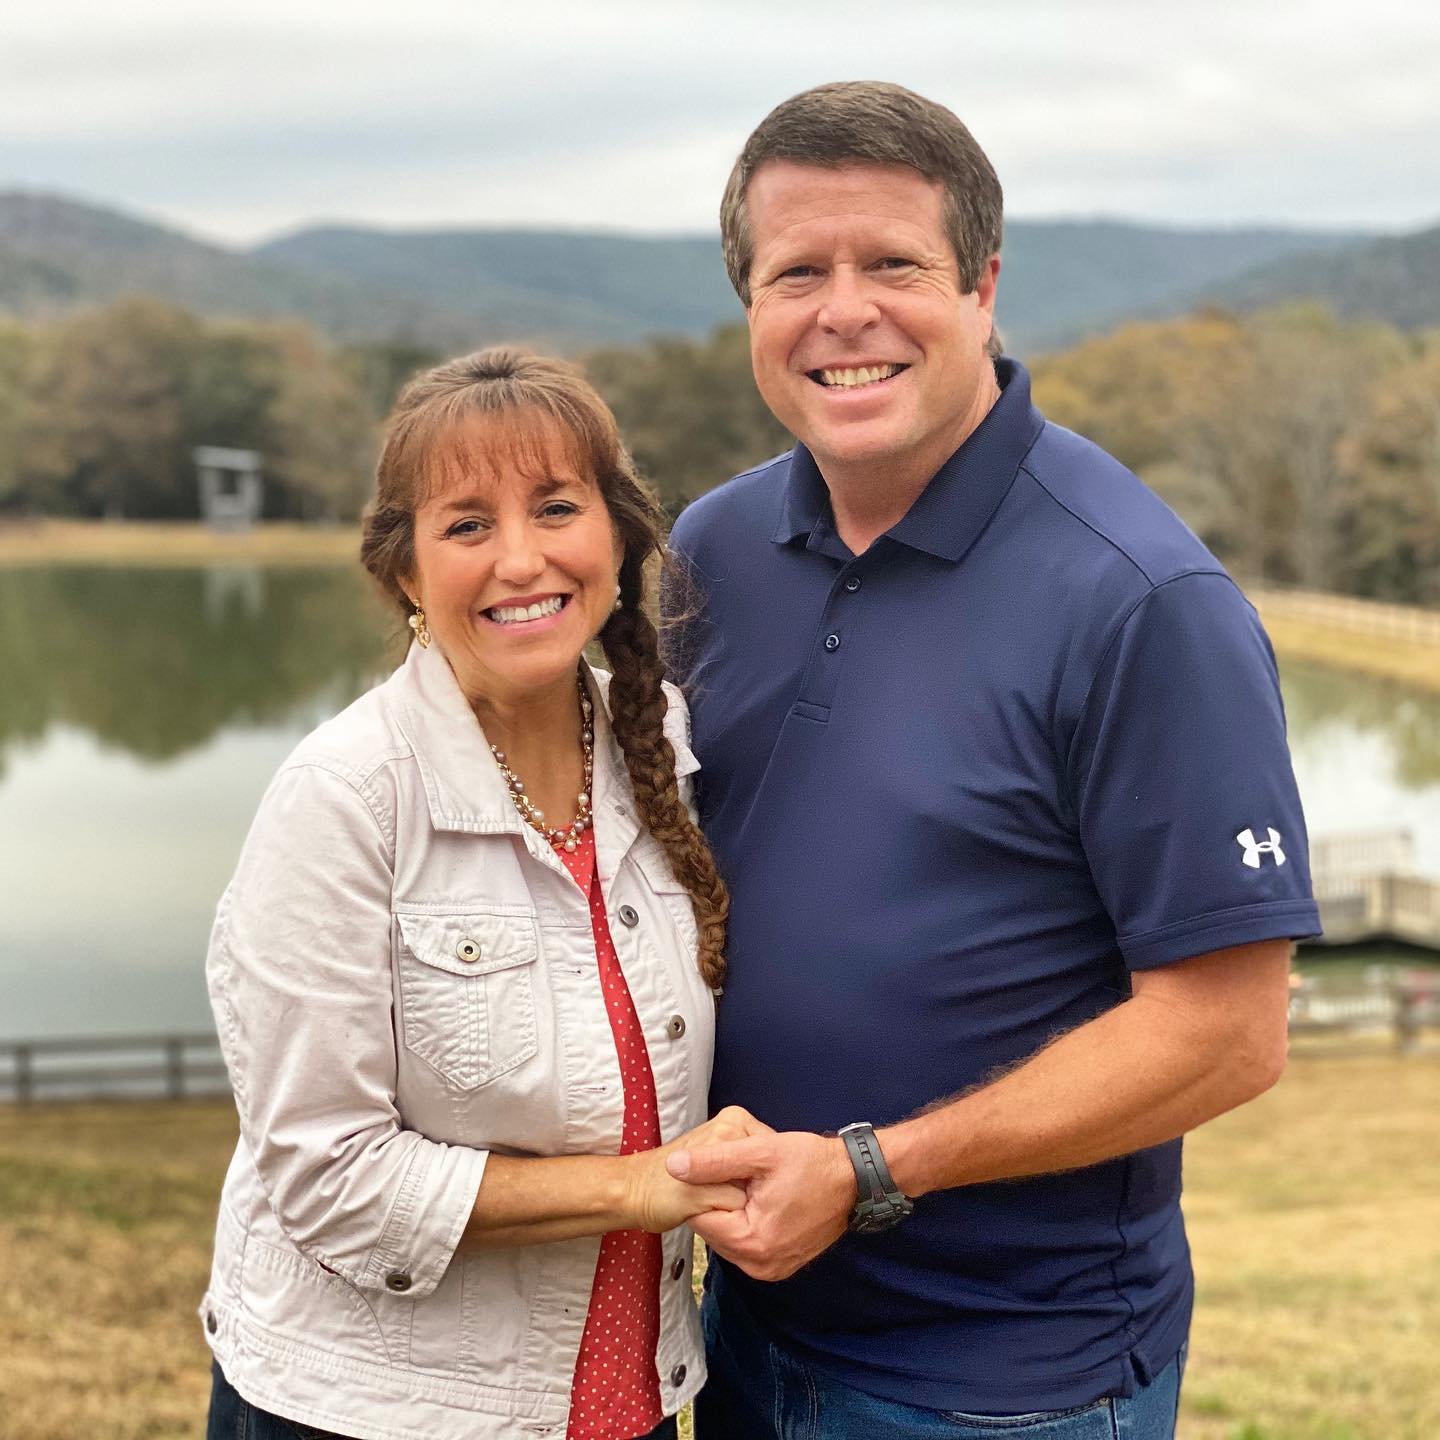 Michelle and Jim Bob  Duggar posed for a photo together